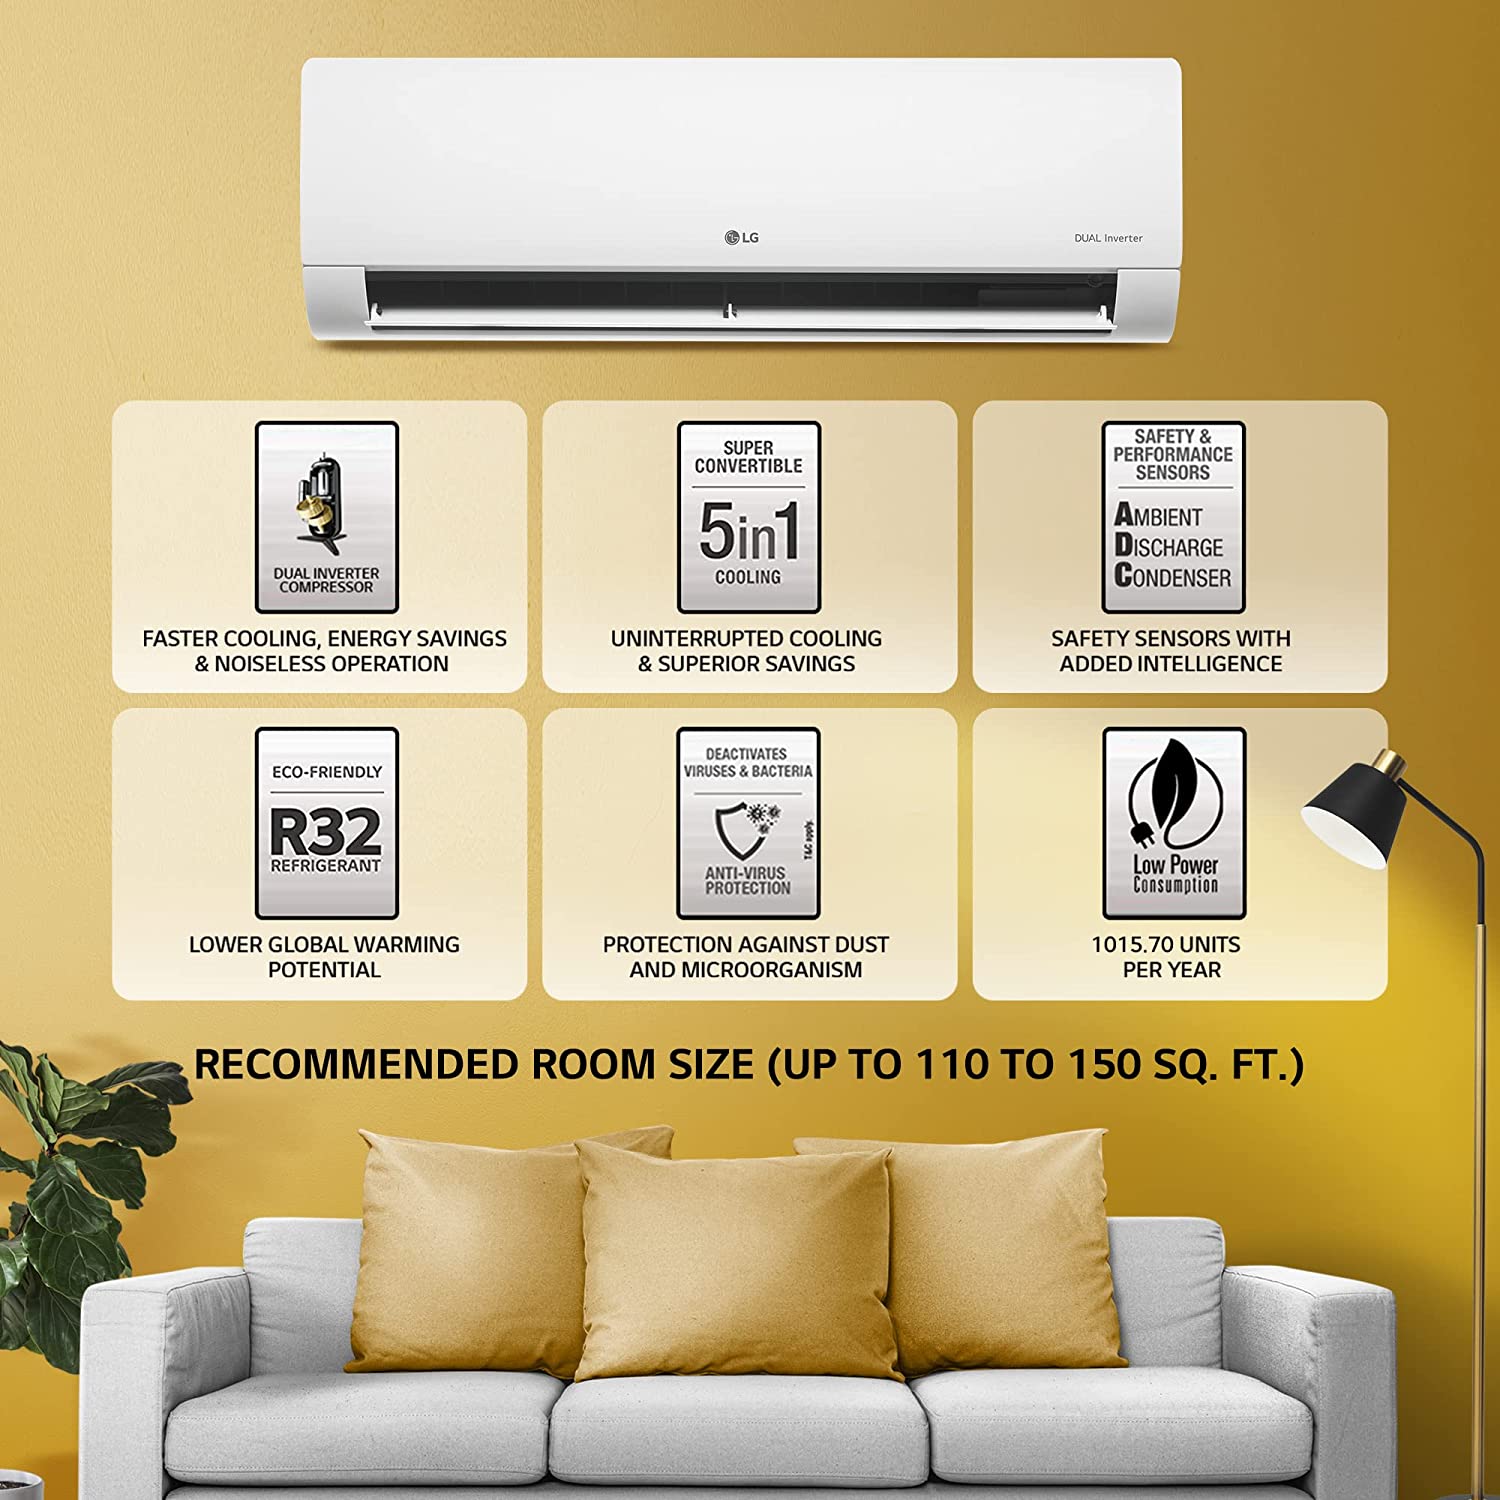 LG 1.5 Ton 3 Star Hot & Cold DUAL Inverter Split AC (Copper, Super Convertible 5-in-1 Cooling, 4 Way Swing & Anti Allergic Filter, 2022 Model, PS-H19VNXF, White)